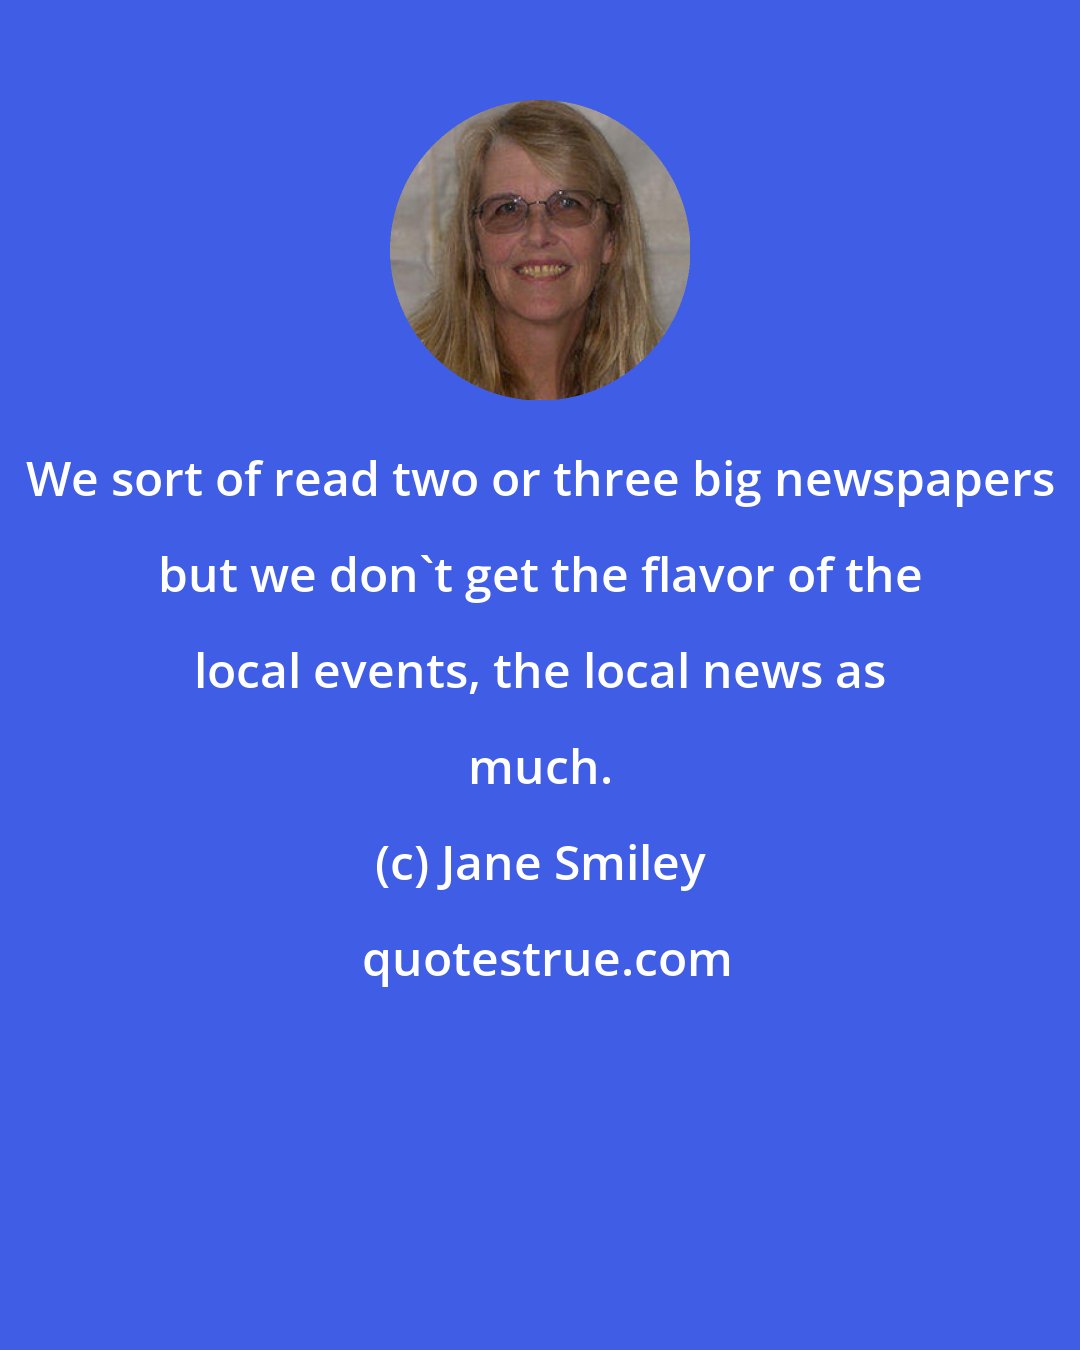 Jane Smiley: We sort of read two or three big newspapers but we don't get the flavor of the local events, the local news as much.